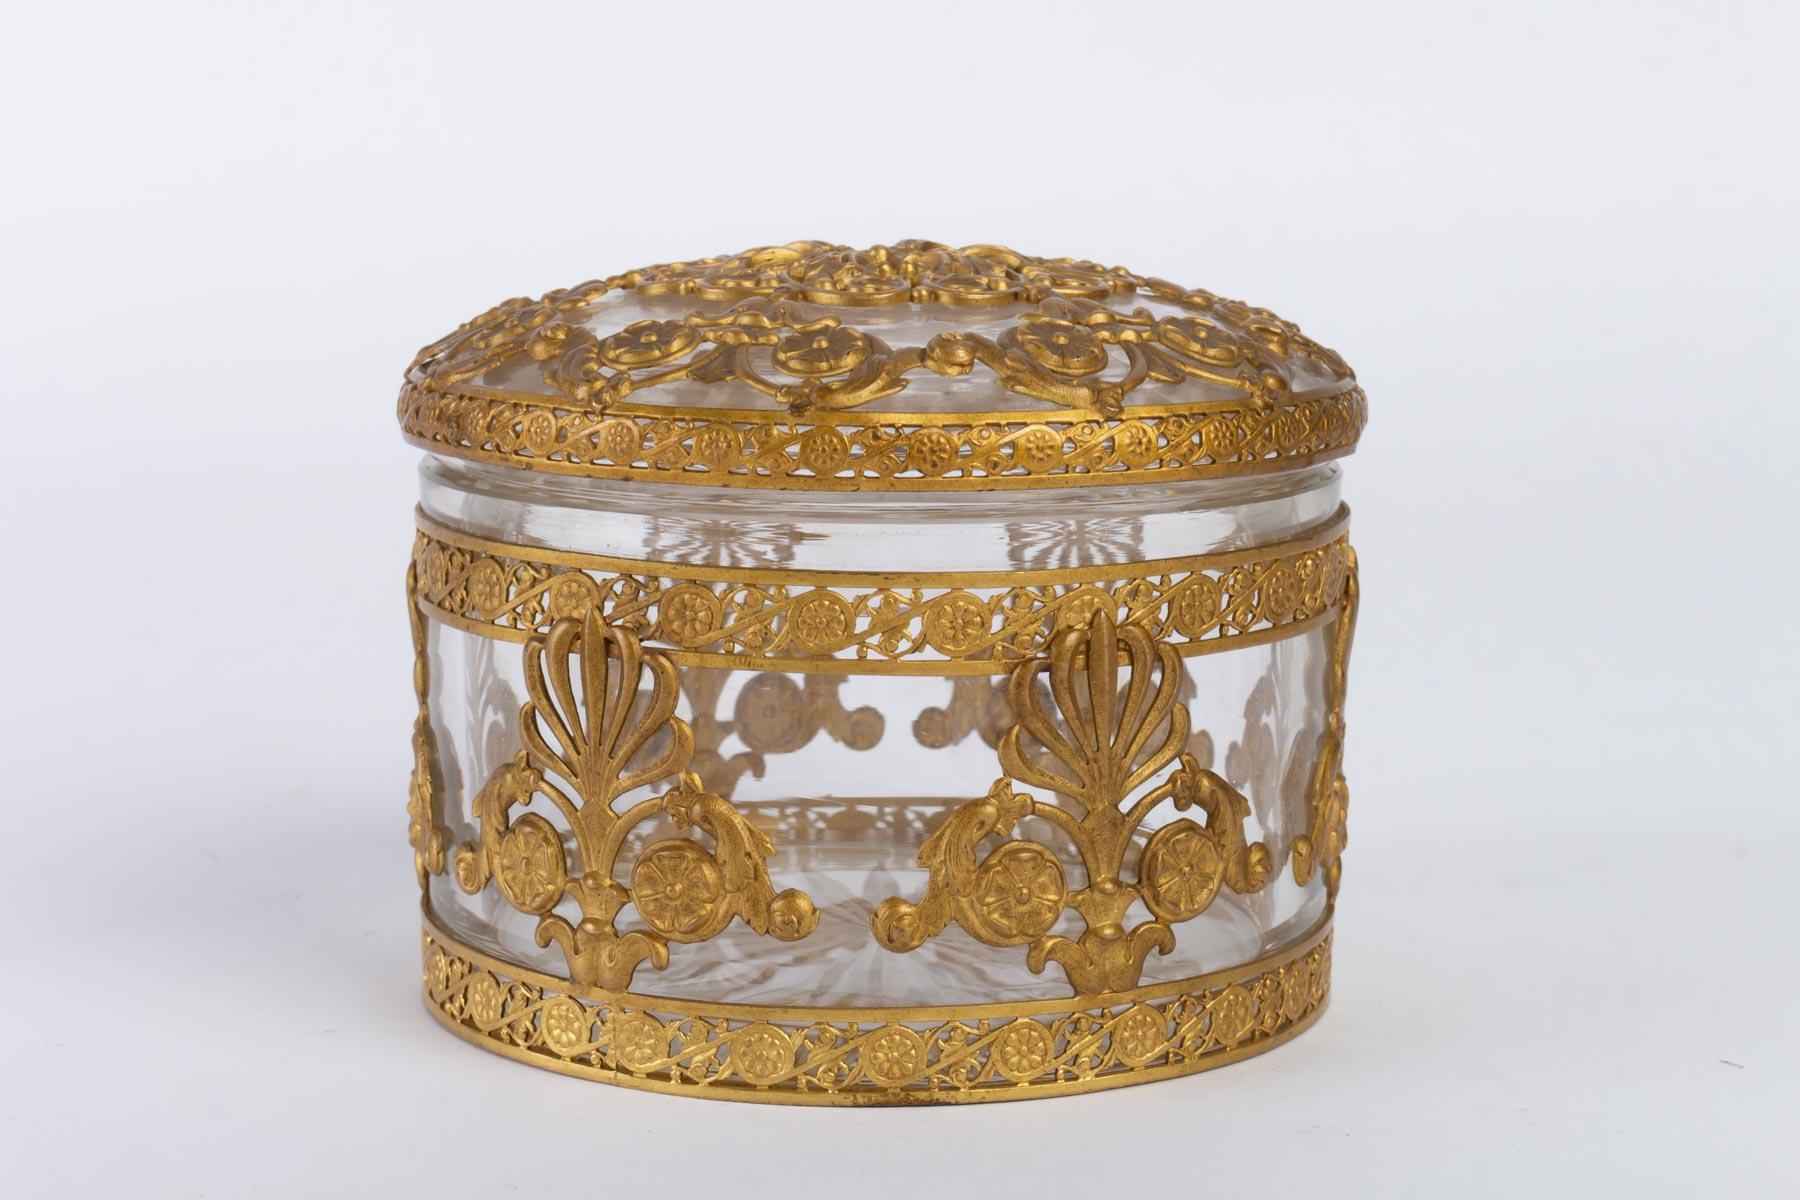 Crystal box with gilded metal frame decorated with palmettes and interlacing, France, 1900.
Perfect condition.
Measures: H 7 cm, D 11.5 cm.